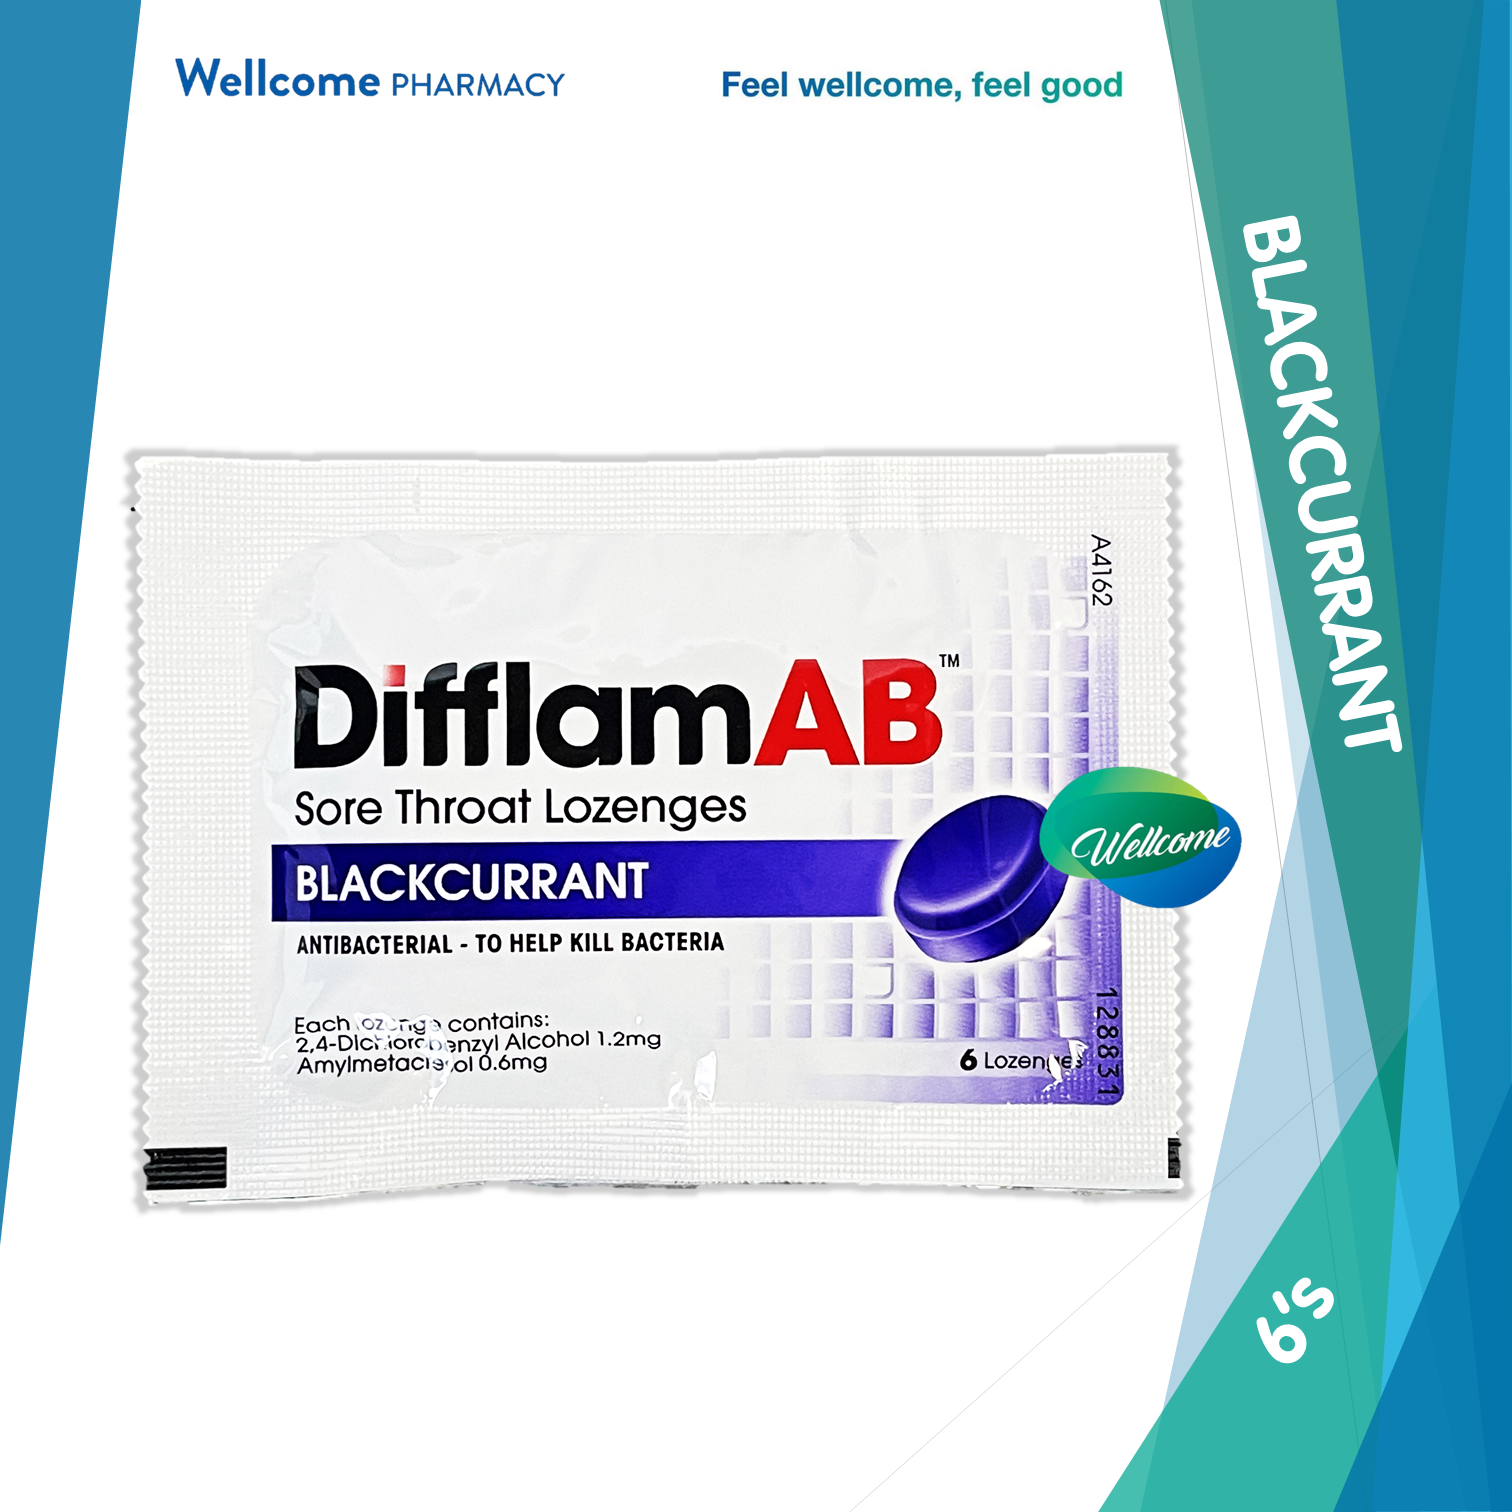 Difflam AB Lozenges Blackcurrant - 6s.png